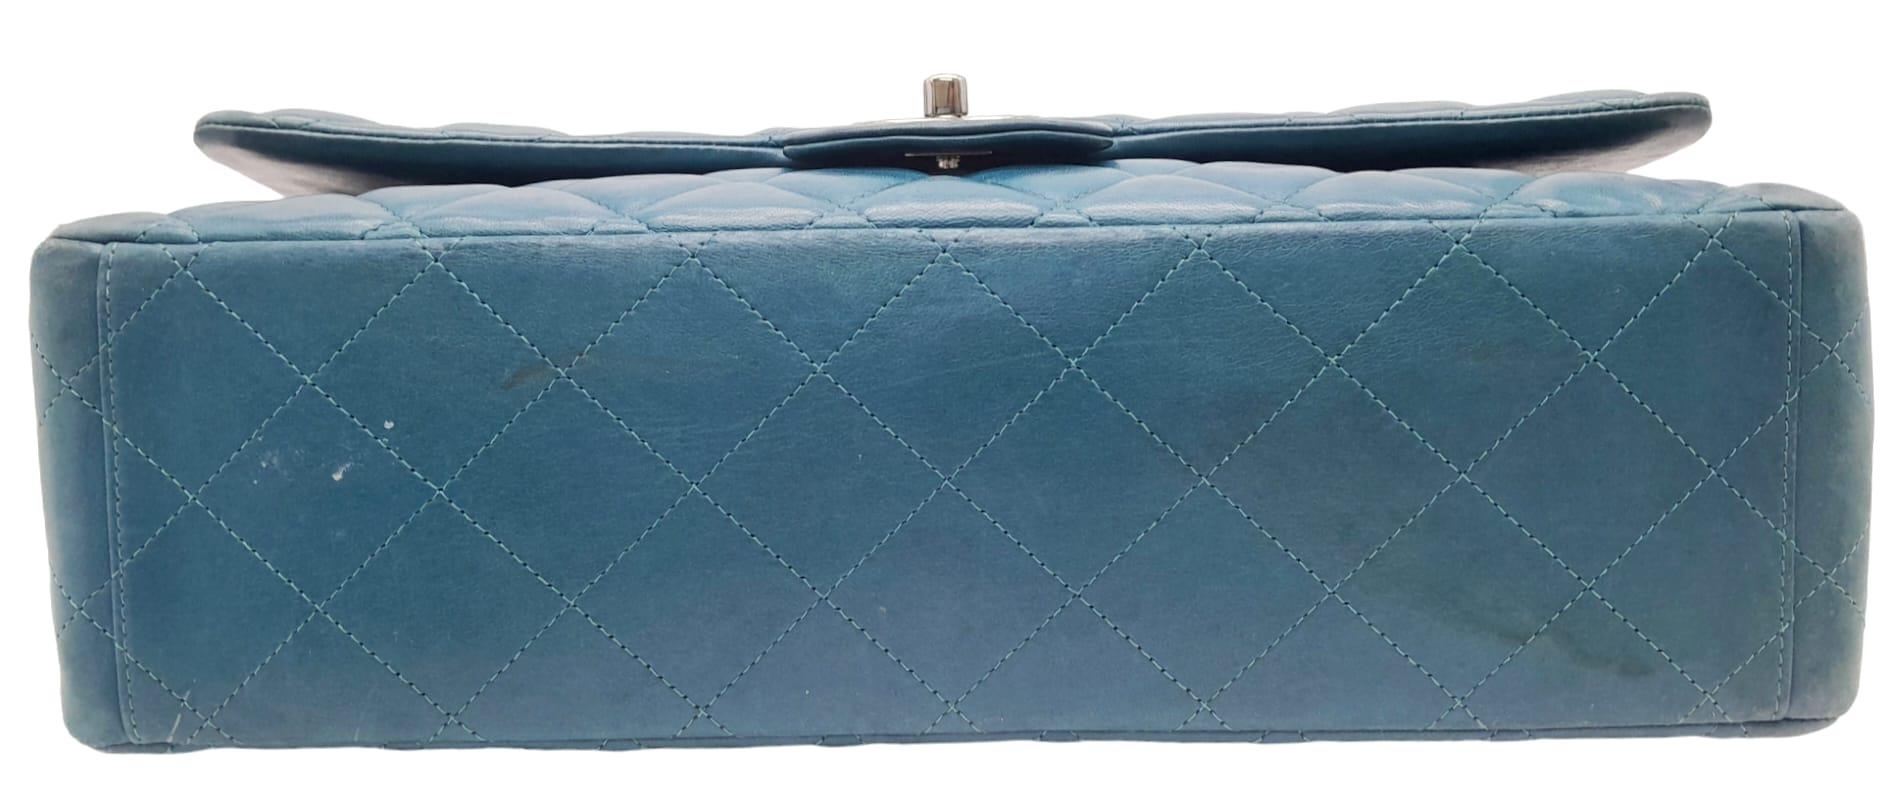 A Chanel Teal Jumbo Classic Double Flap Bag. Quilted leather exterior with silver-toned hardware, - Image 3 of 14